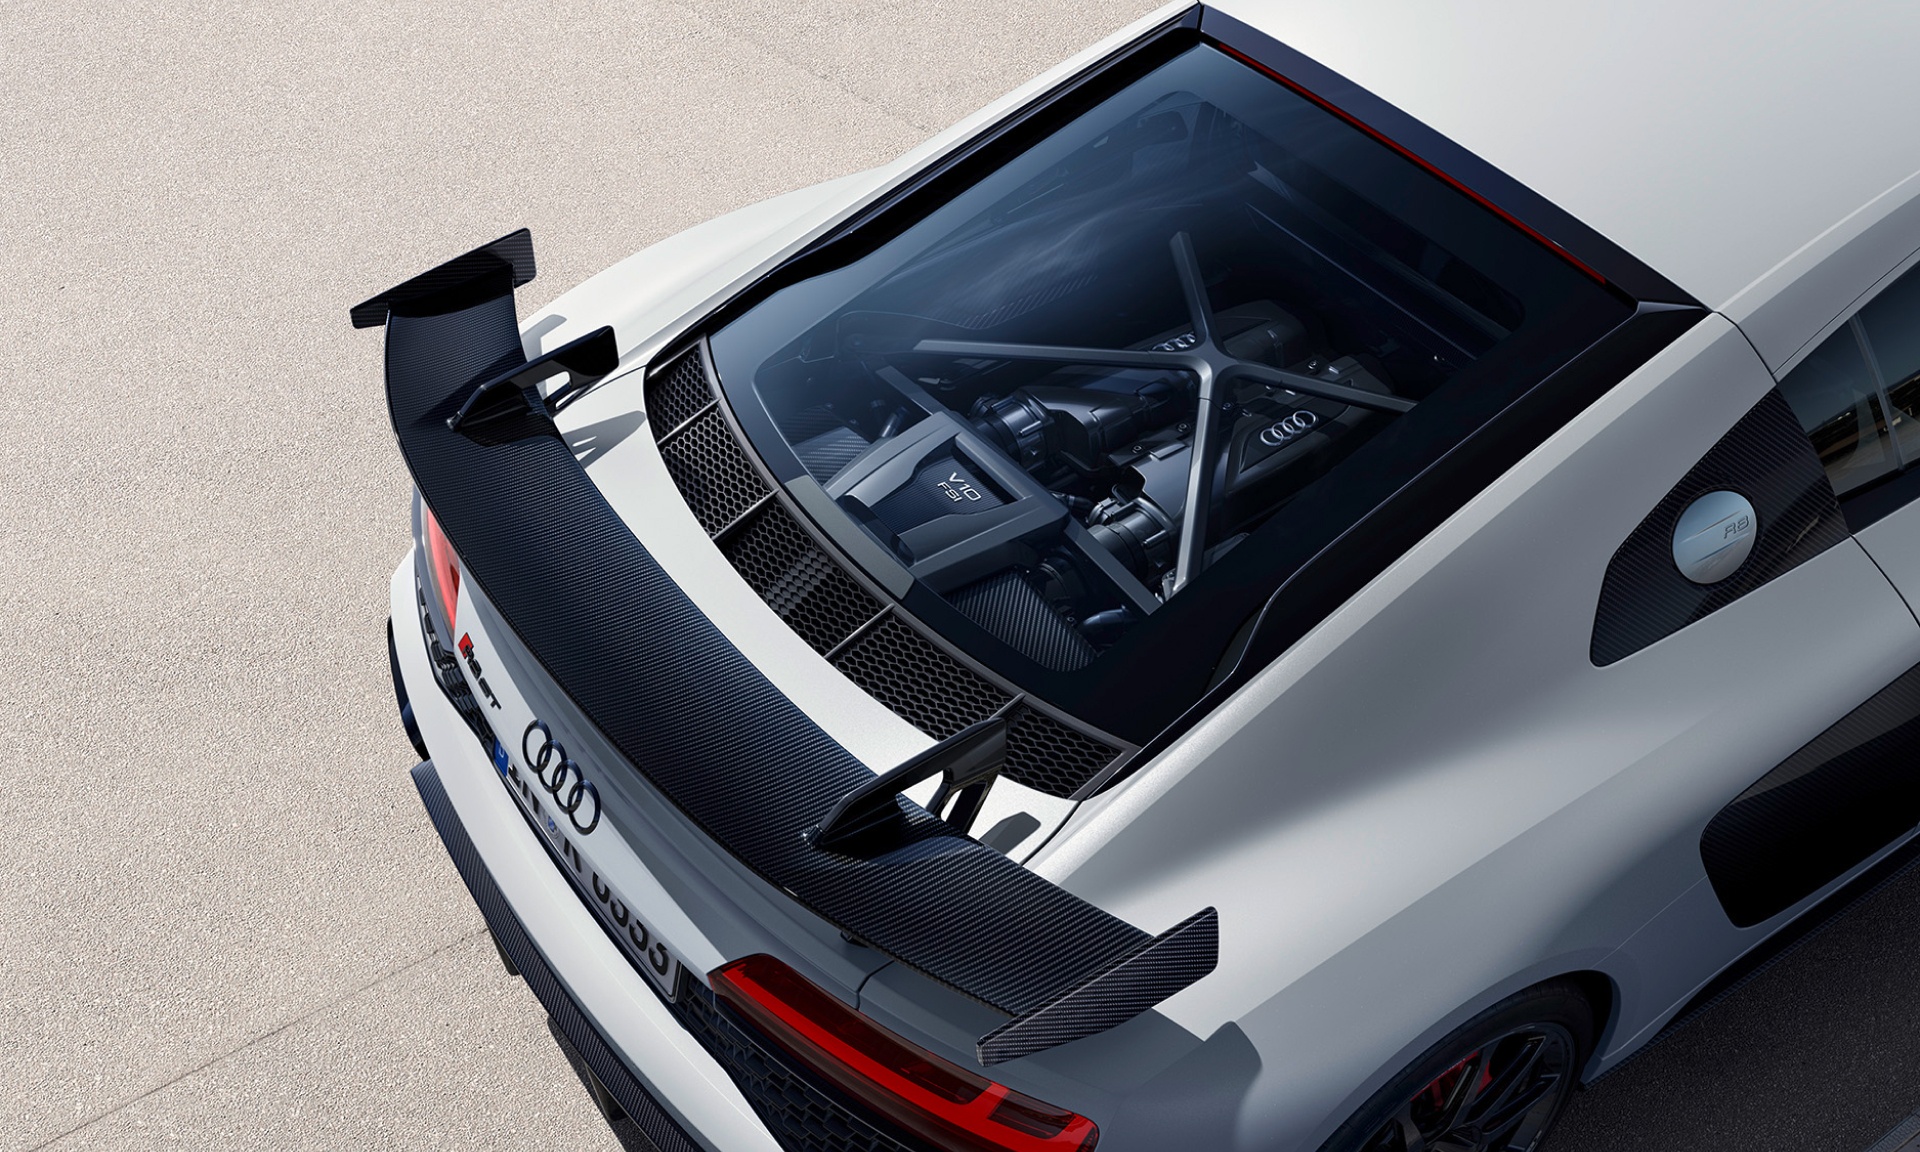 Bird’s eye view of the rear and engine compartment of the Audi R8 GT.